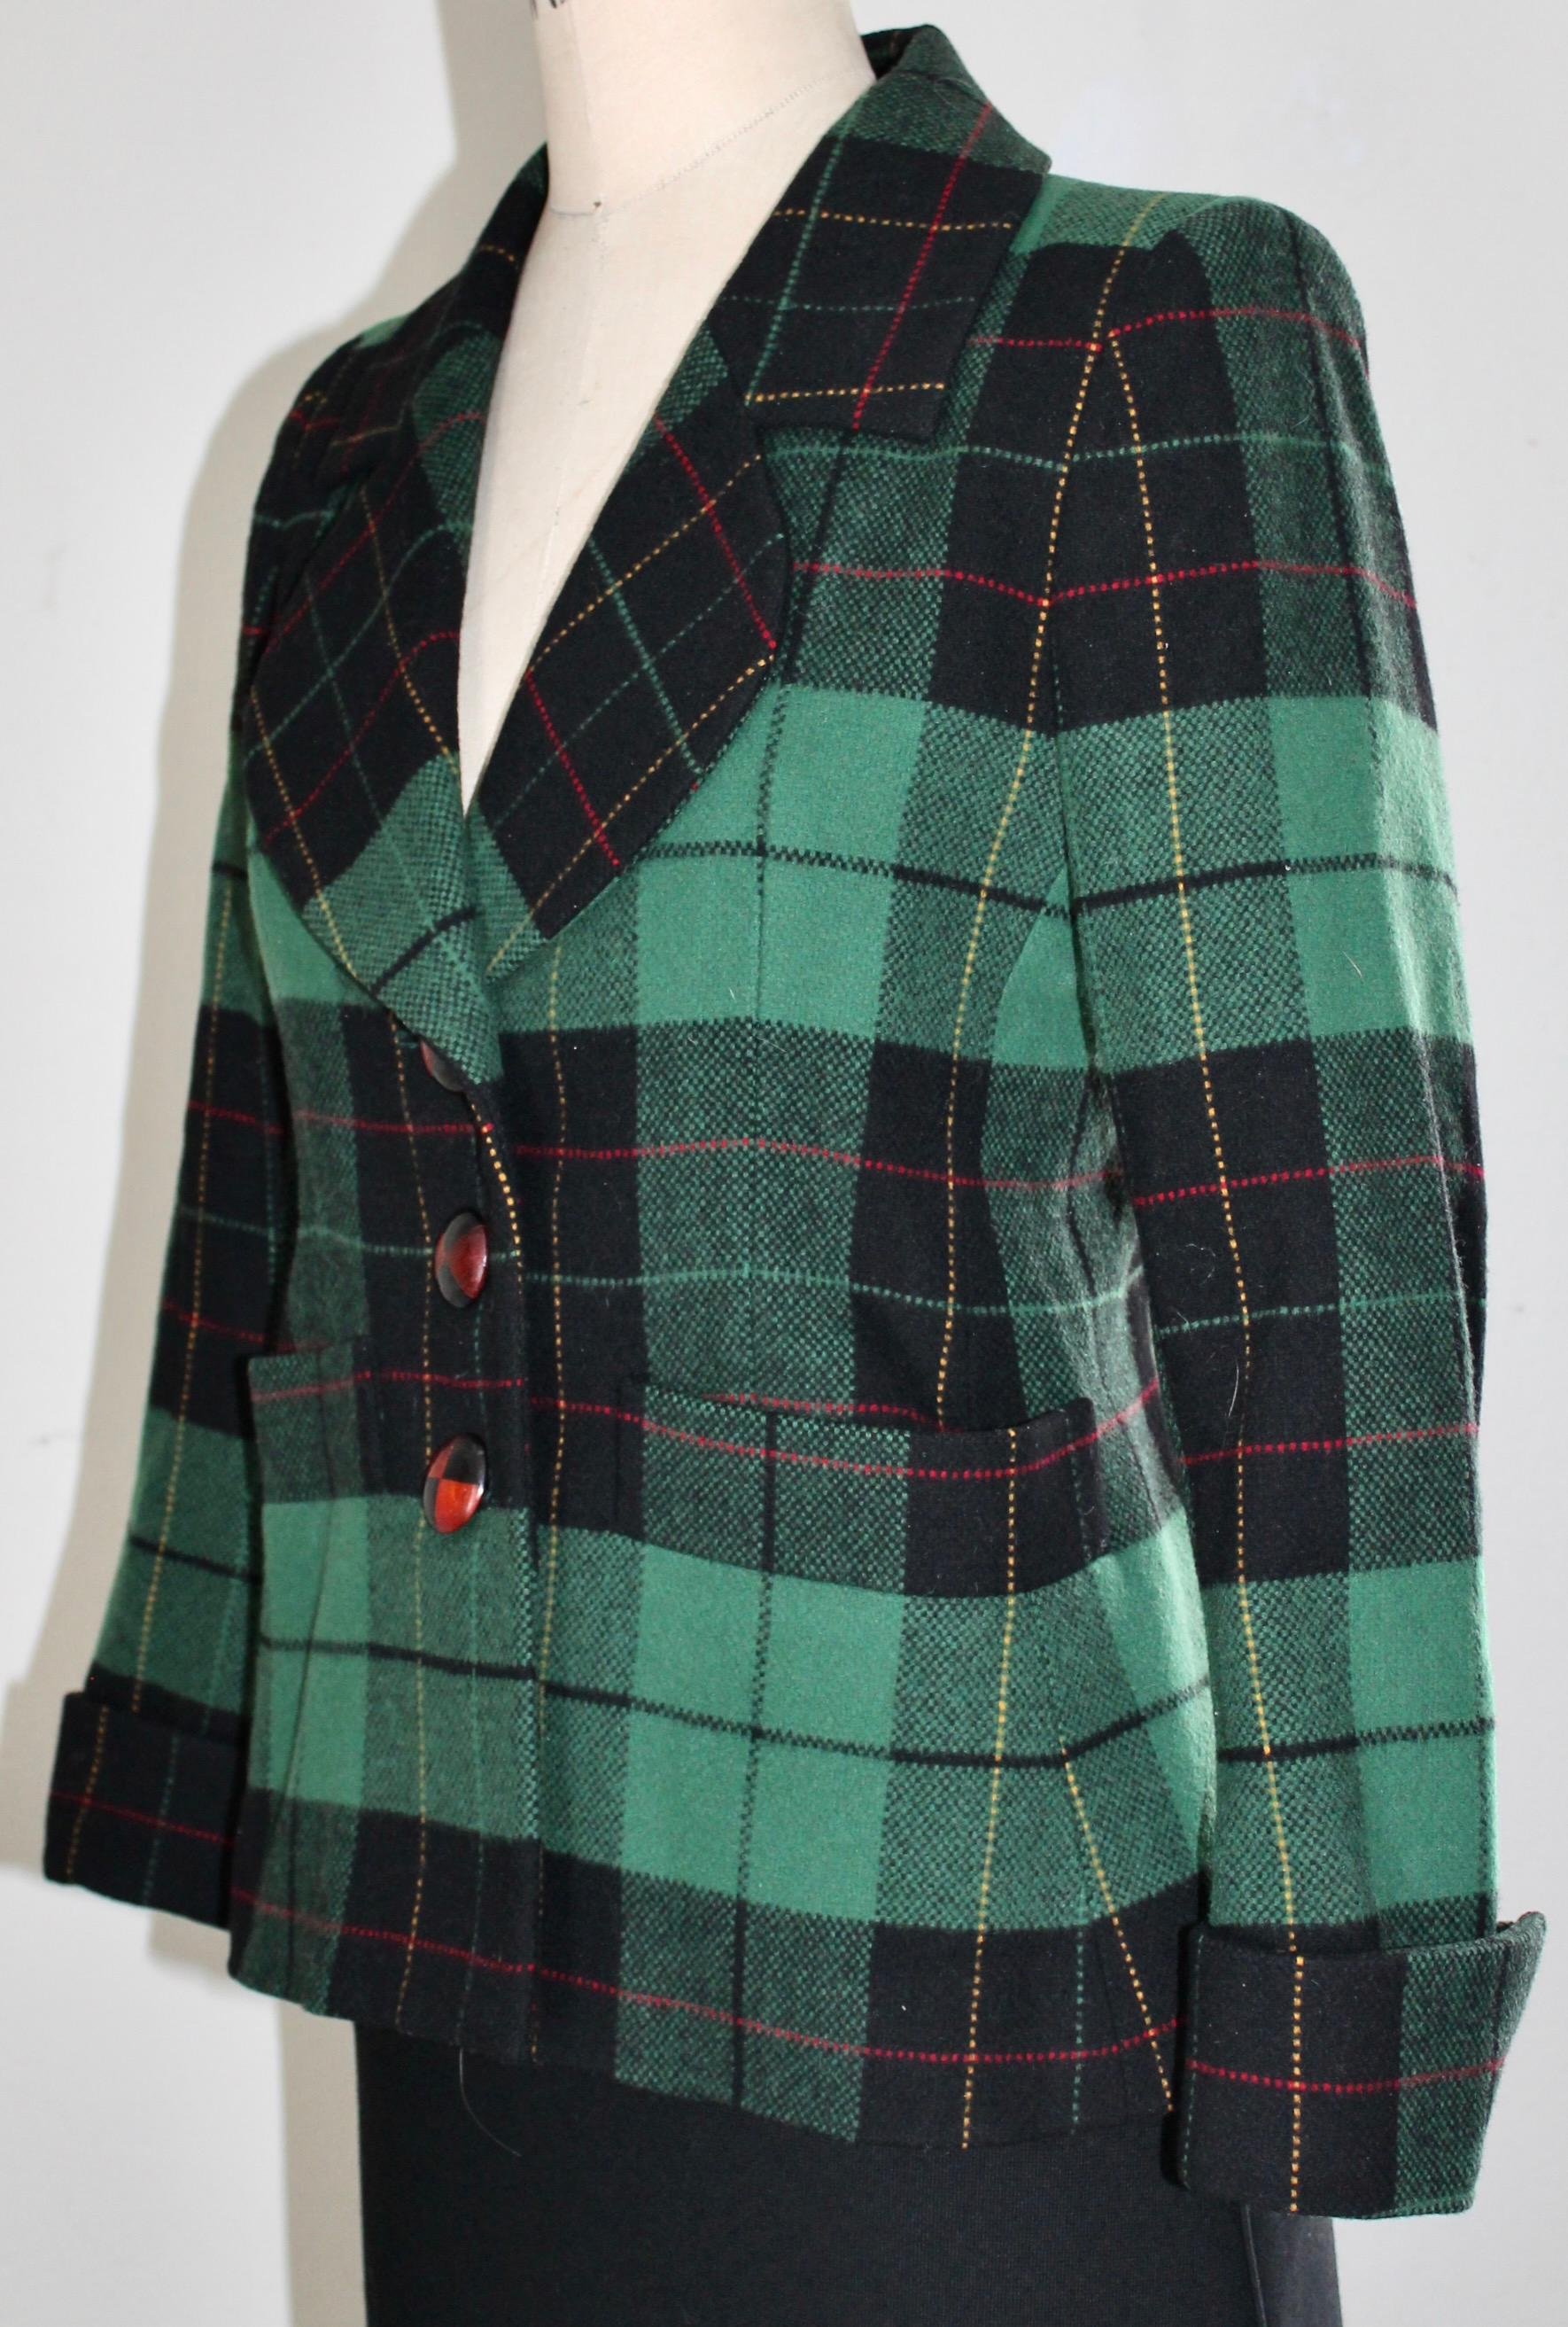 Yves Saint Laurent Rive Gauche Plaid Jacket 1990's In Good Condition For Sale In Sharon, CT